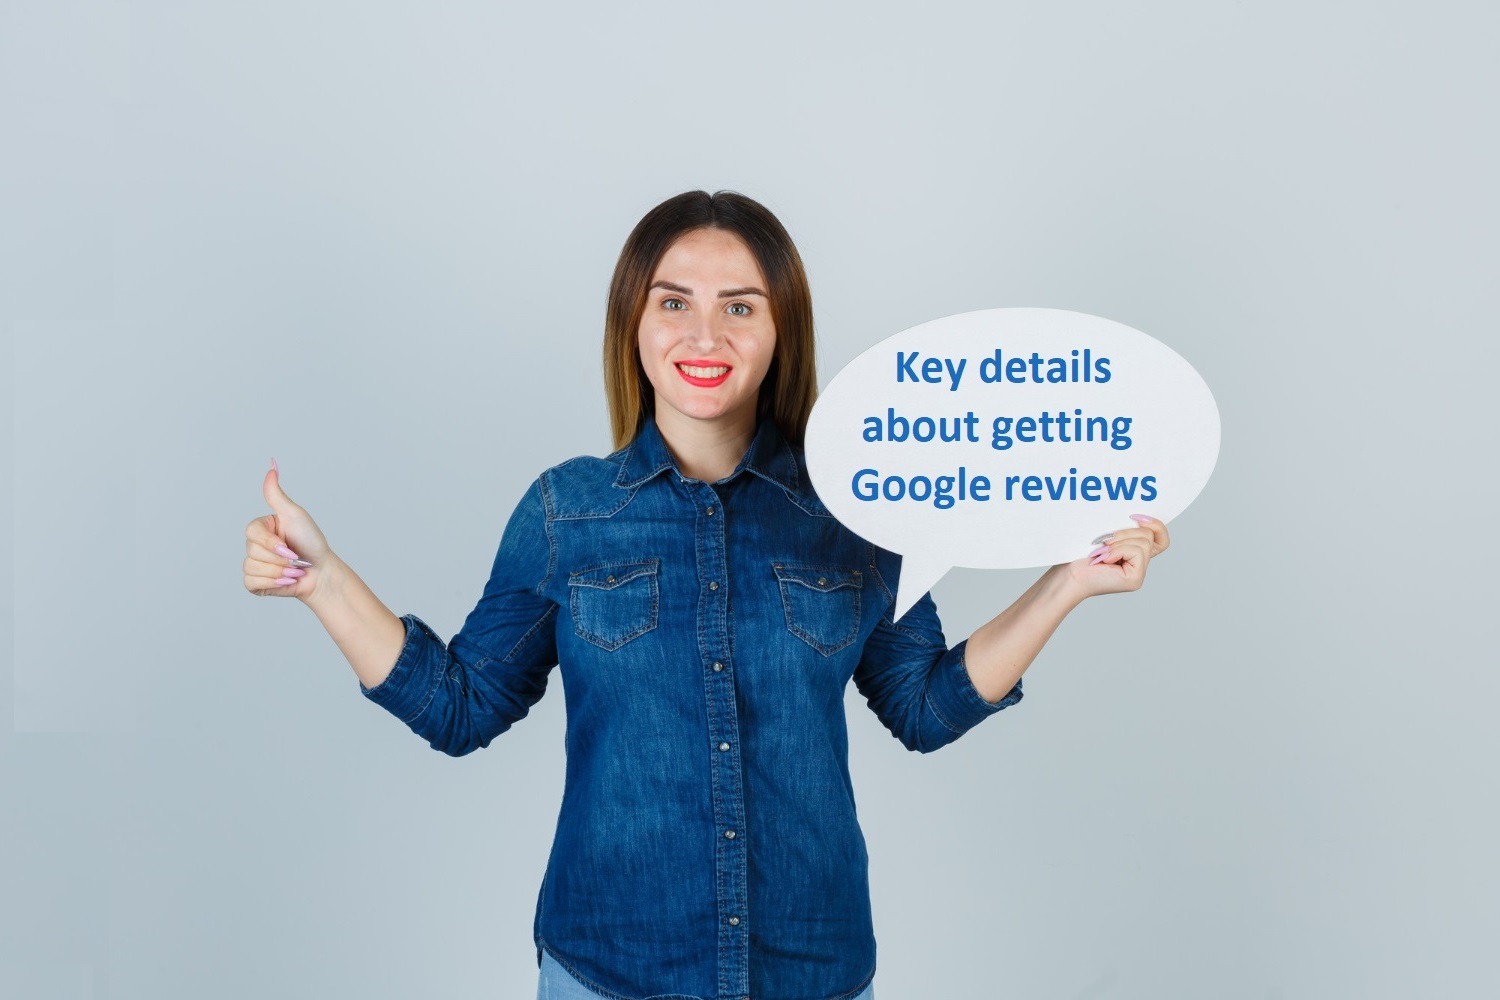 How to easily generate Google reviews as a local business to great effect.